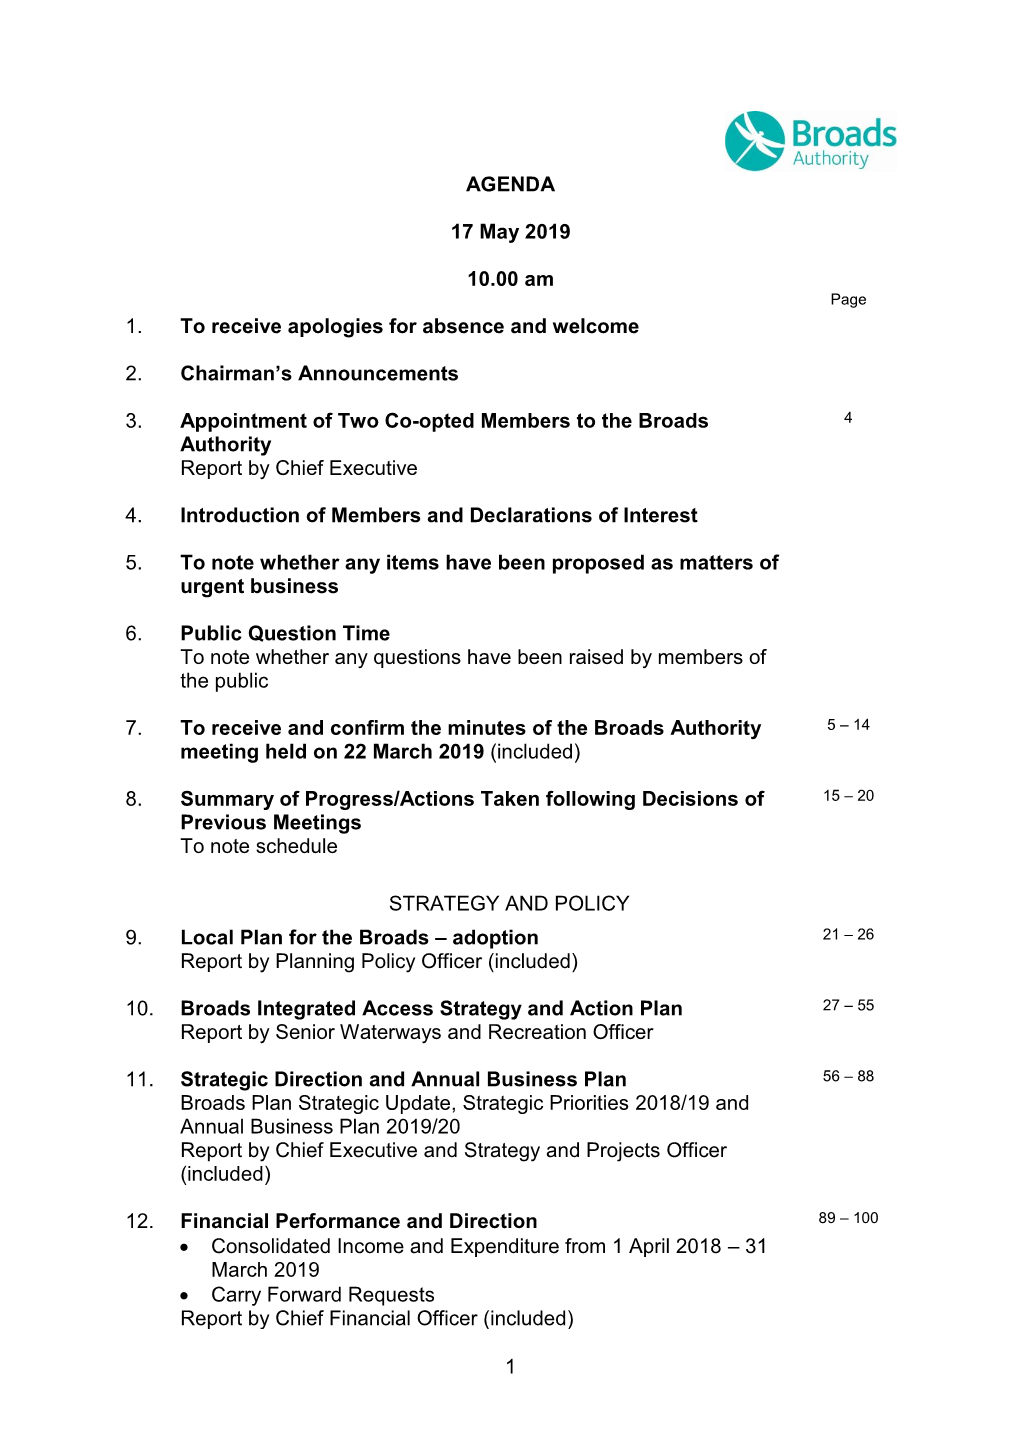 AGENDA 17 May 2019 10.00 Am 1. to Receive Apologies for Absence And